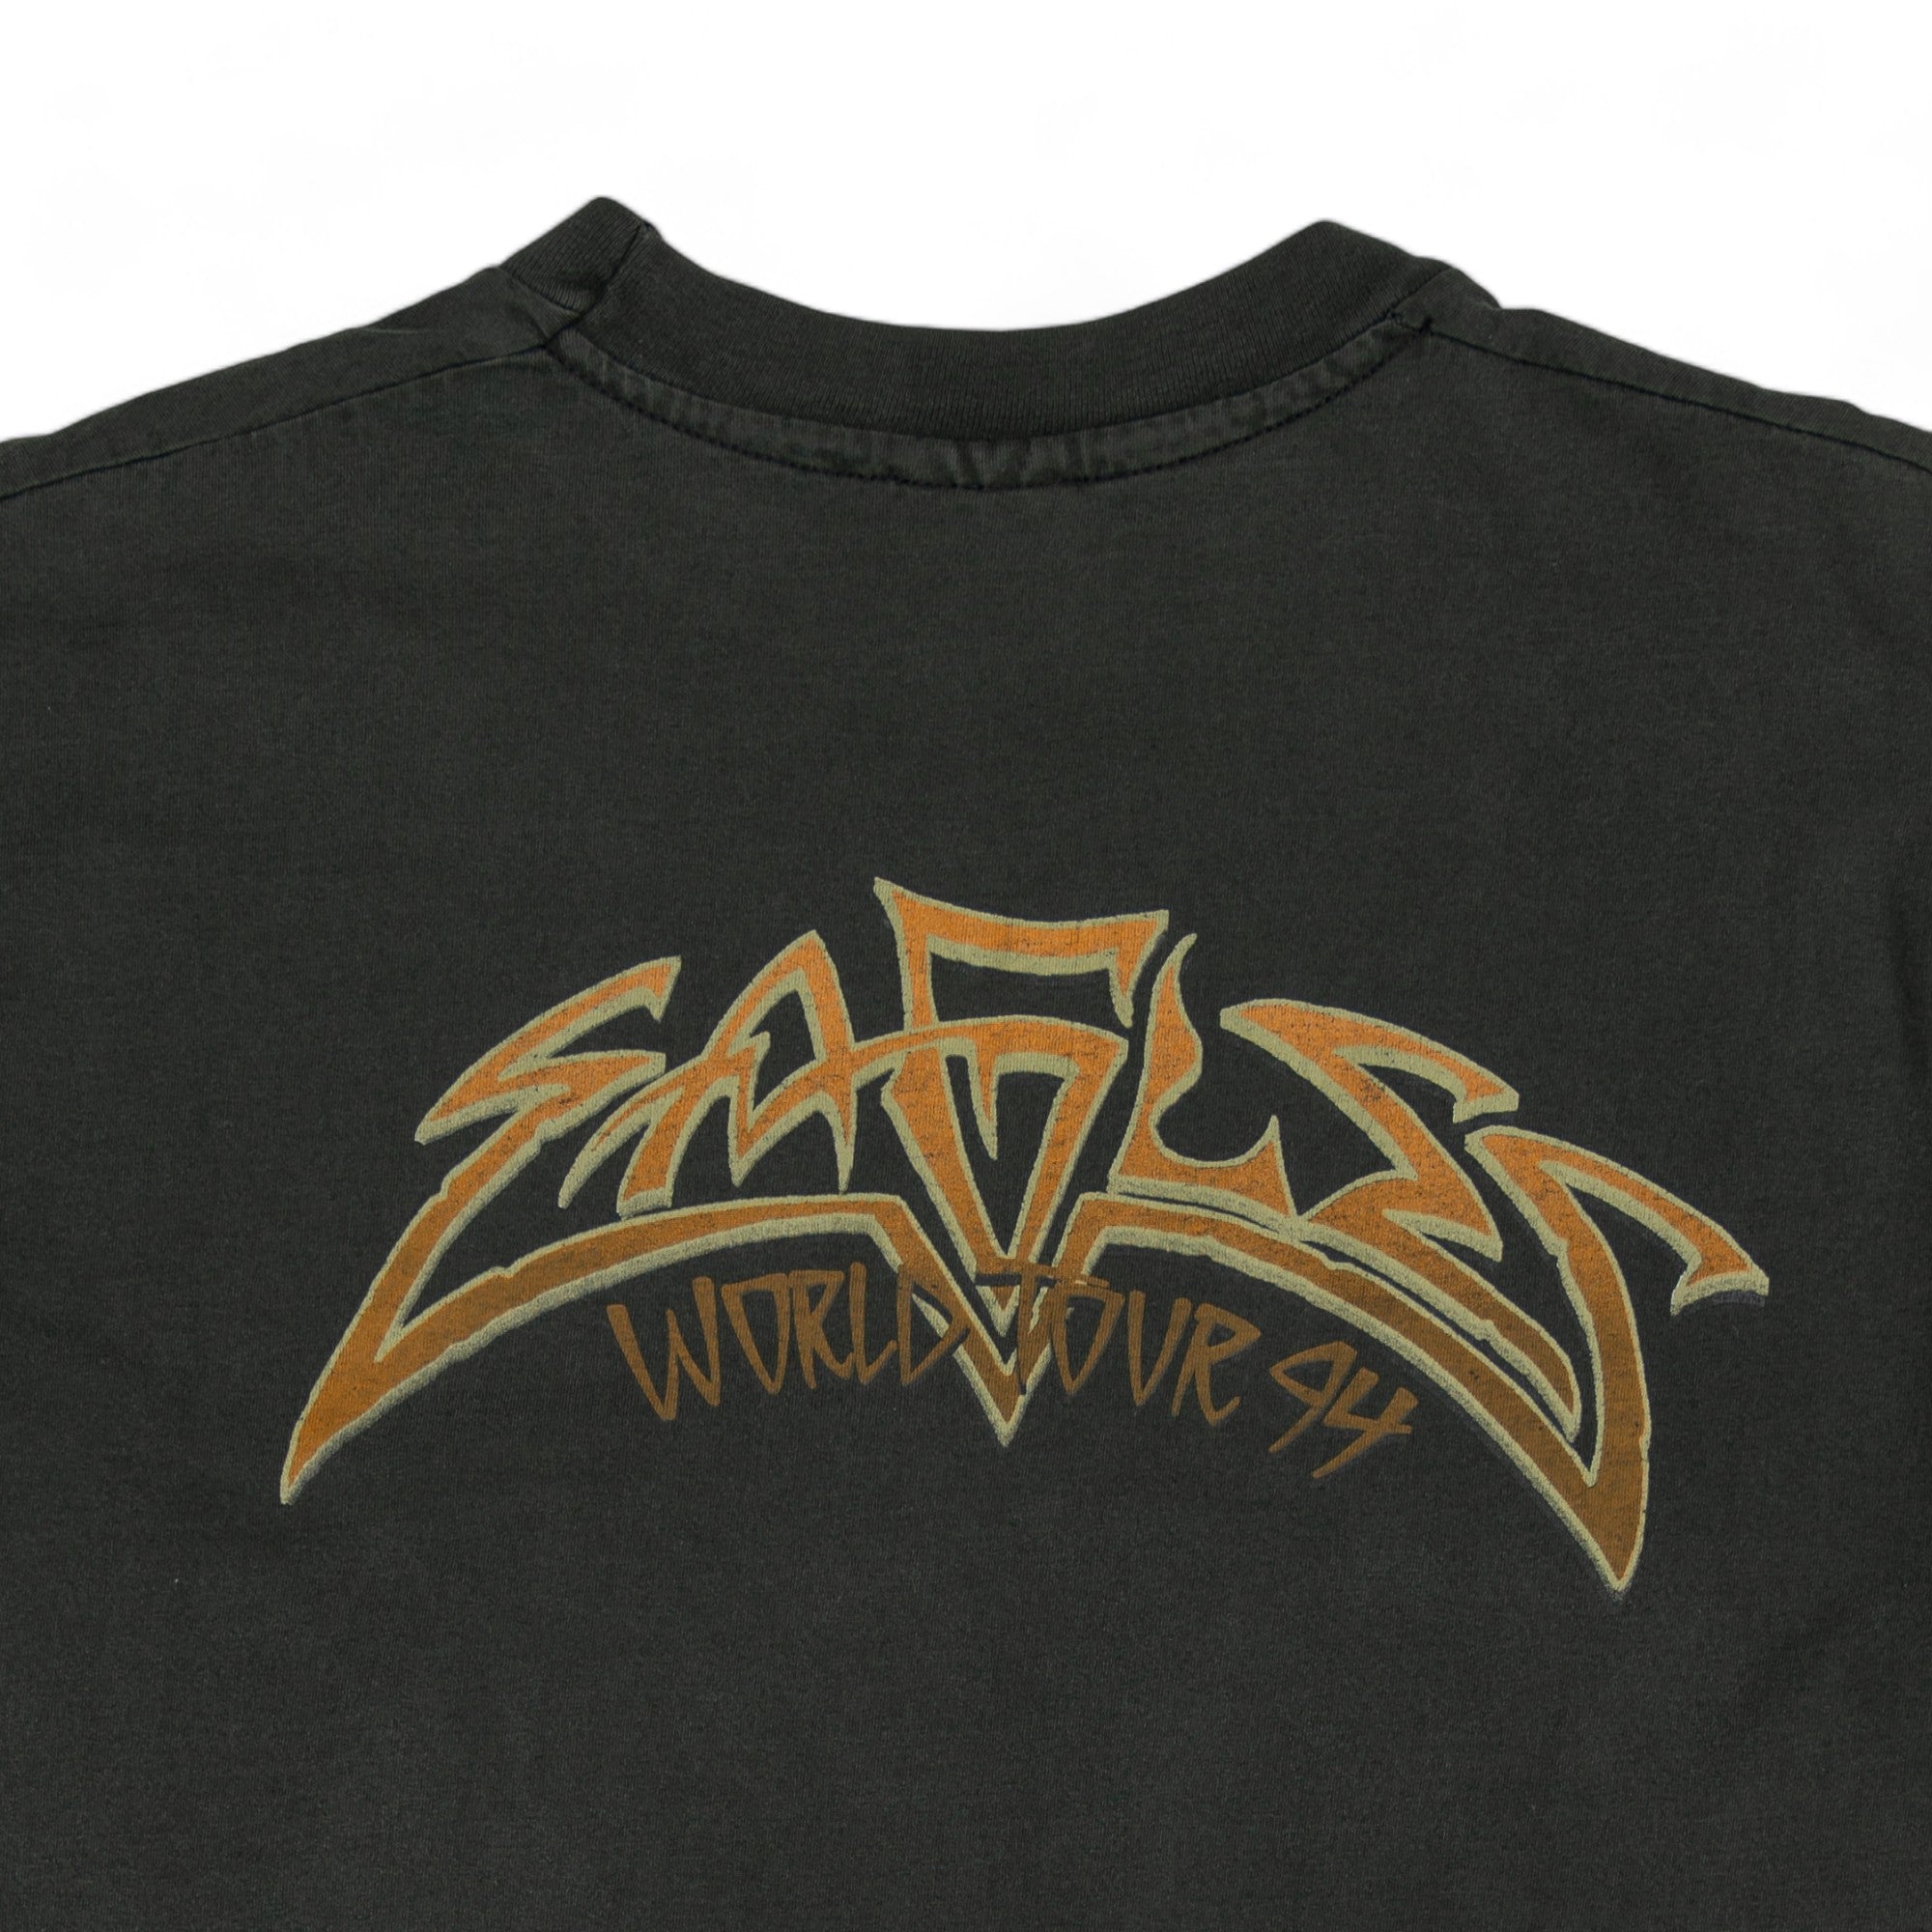 FADED SINGLE STITCH EAGLES 'HELL FREEZES OVER' WORLD TOUR TEE - 1990'S